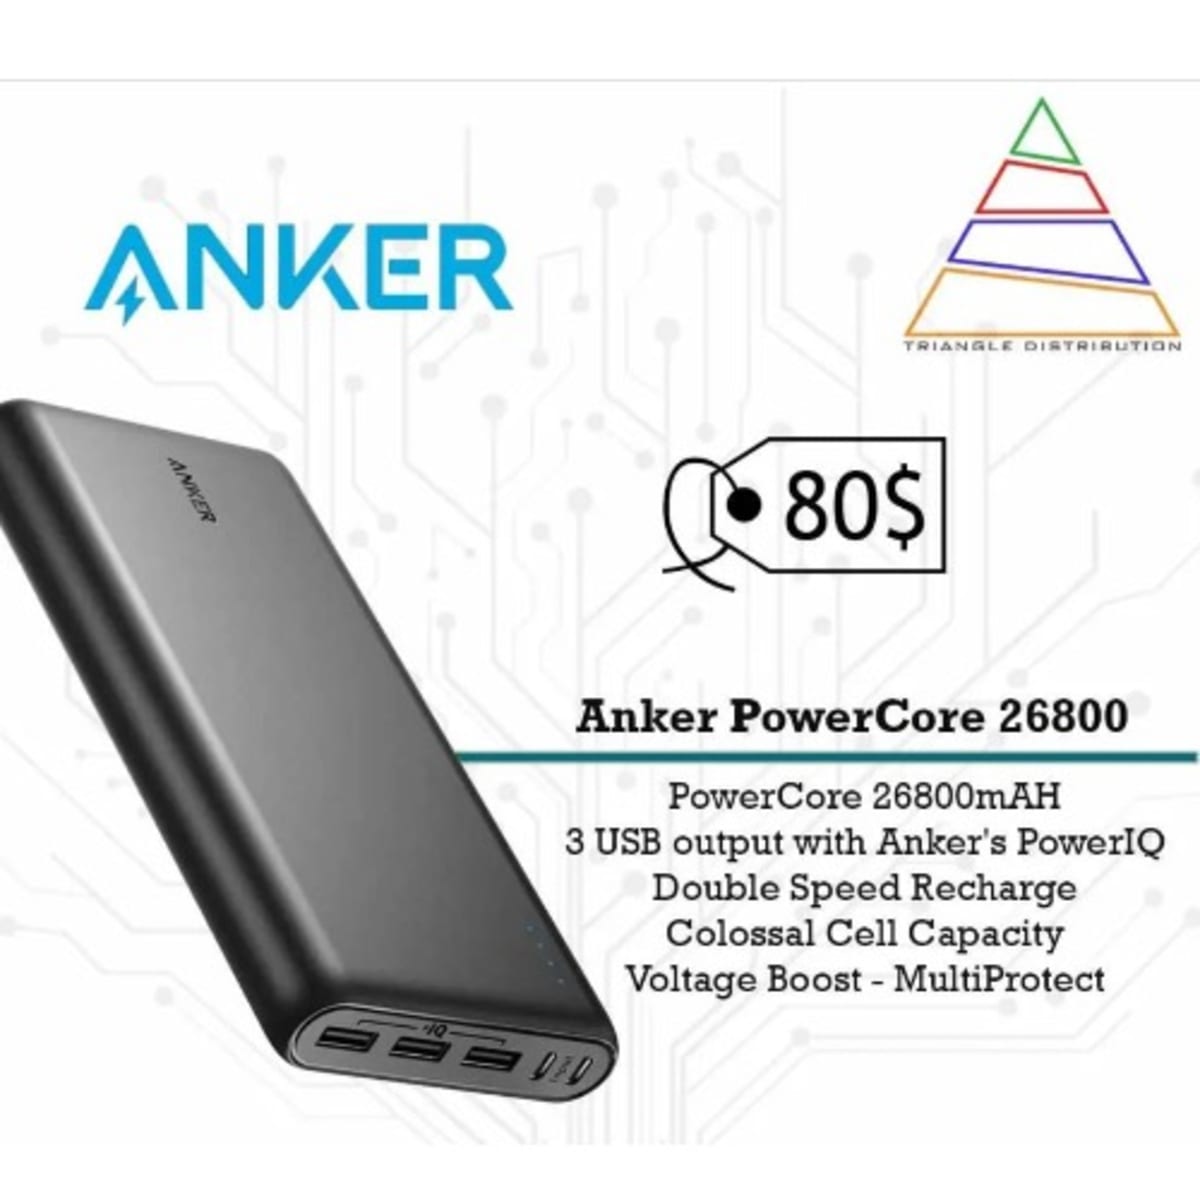 The Complete Guide of Qualcomm Quick Charge 3.0 - Anker US